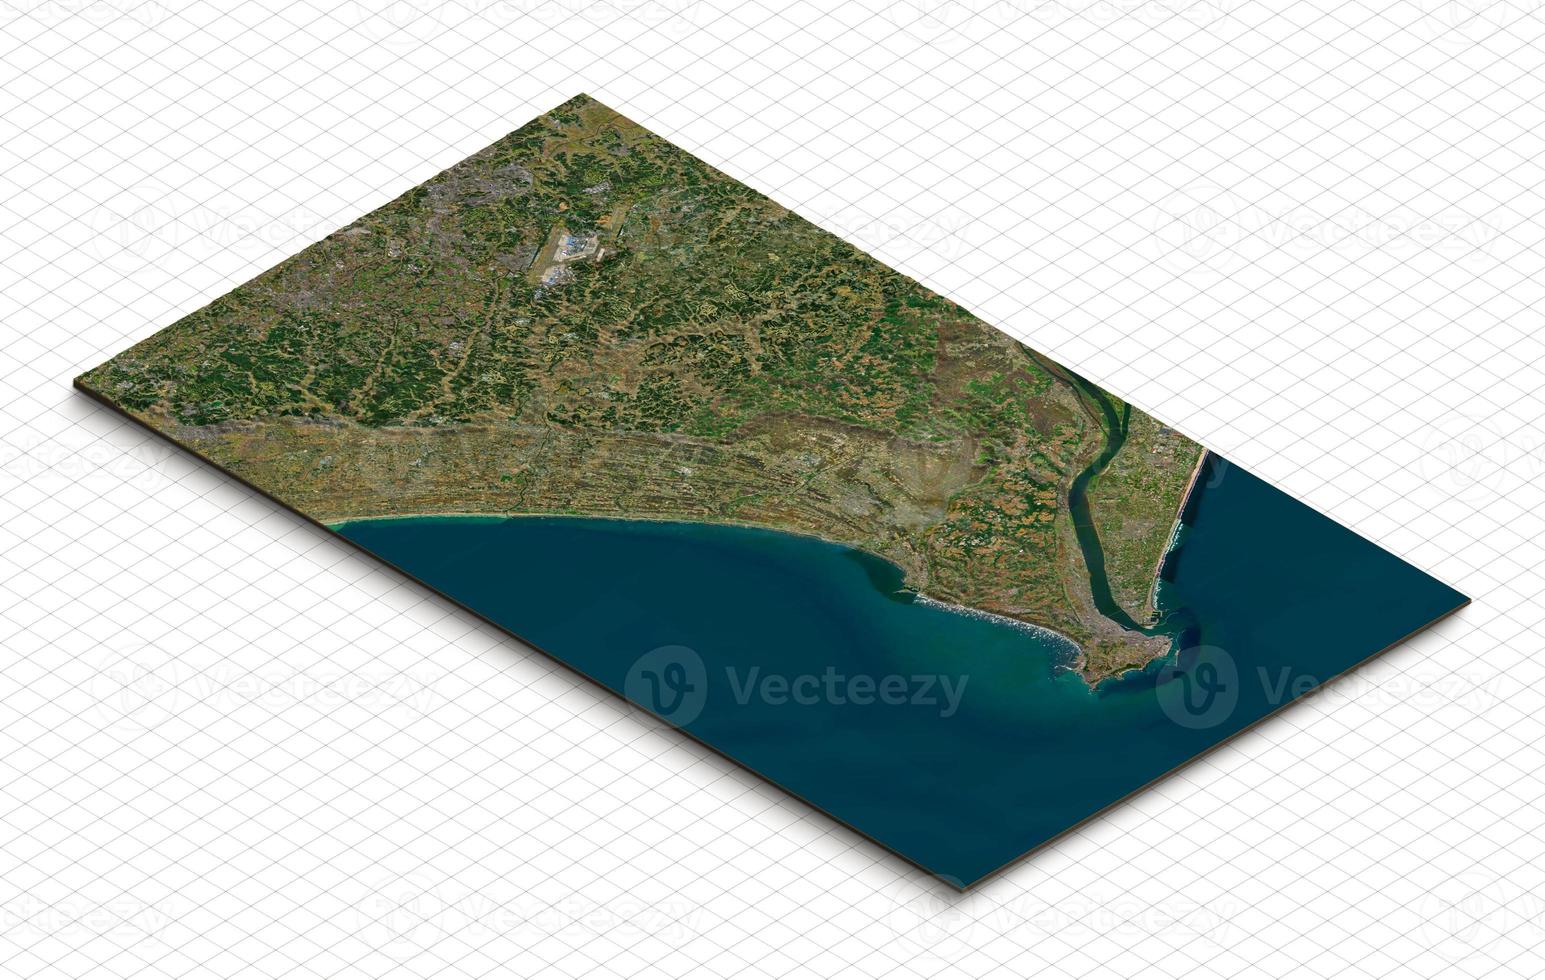 3d model of Narita, Chiba, Japan. Isometric map virtual terrain 3d for infographic. Geography and topography planet earth flattened satellite view photo